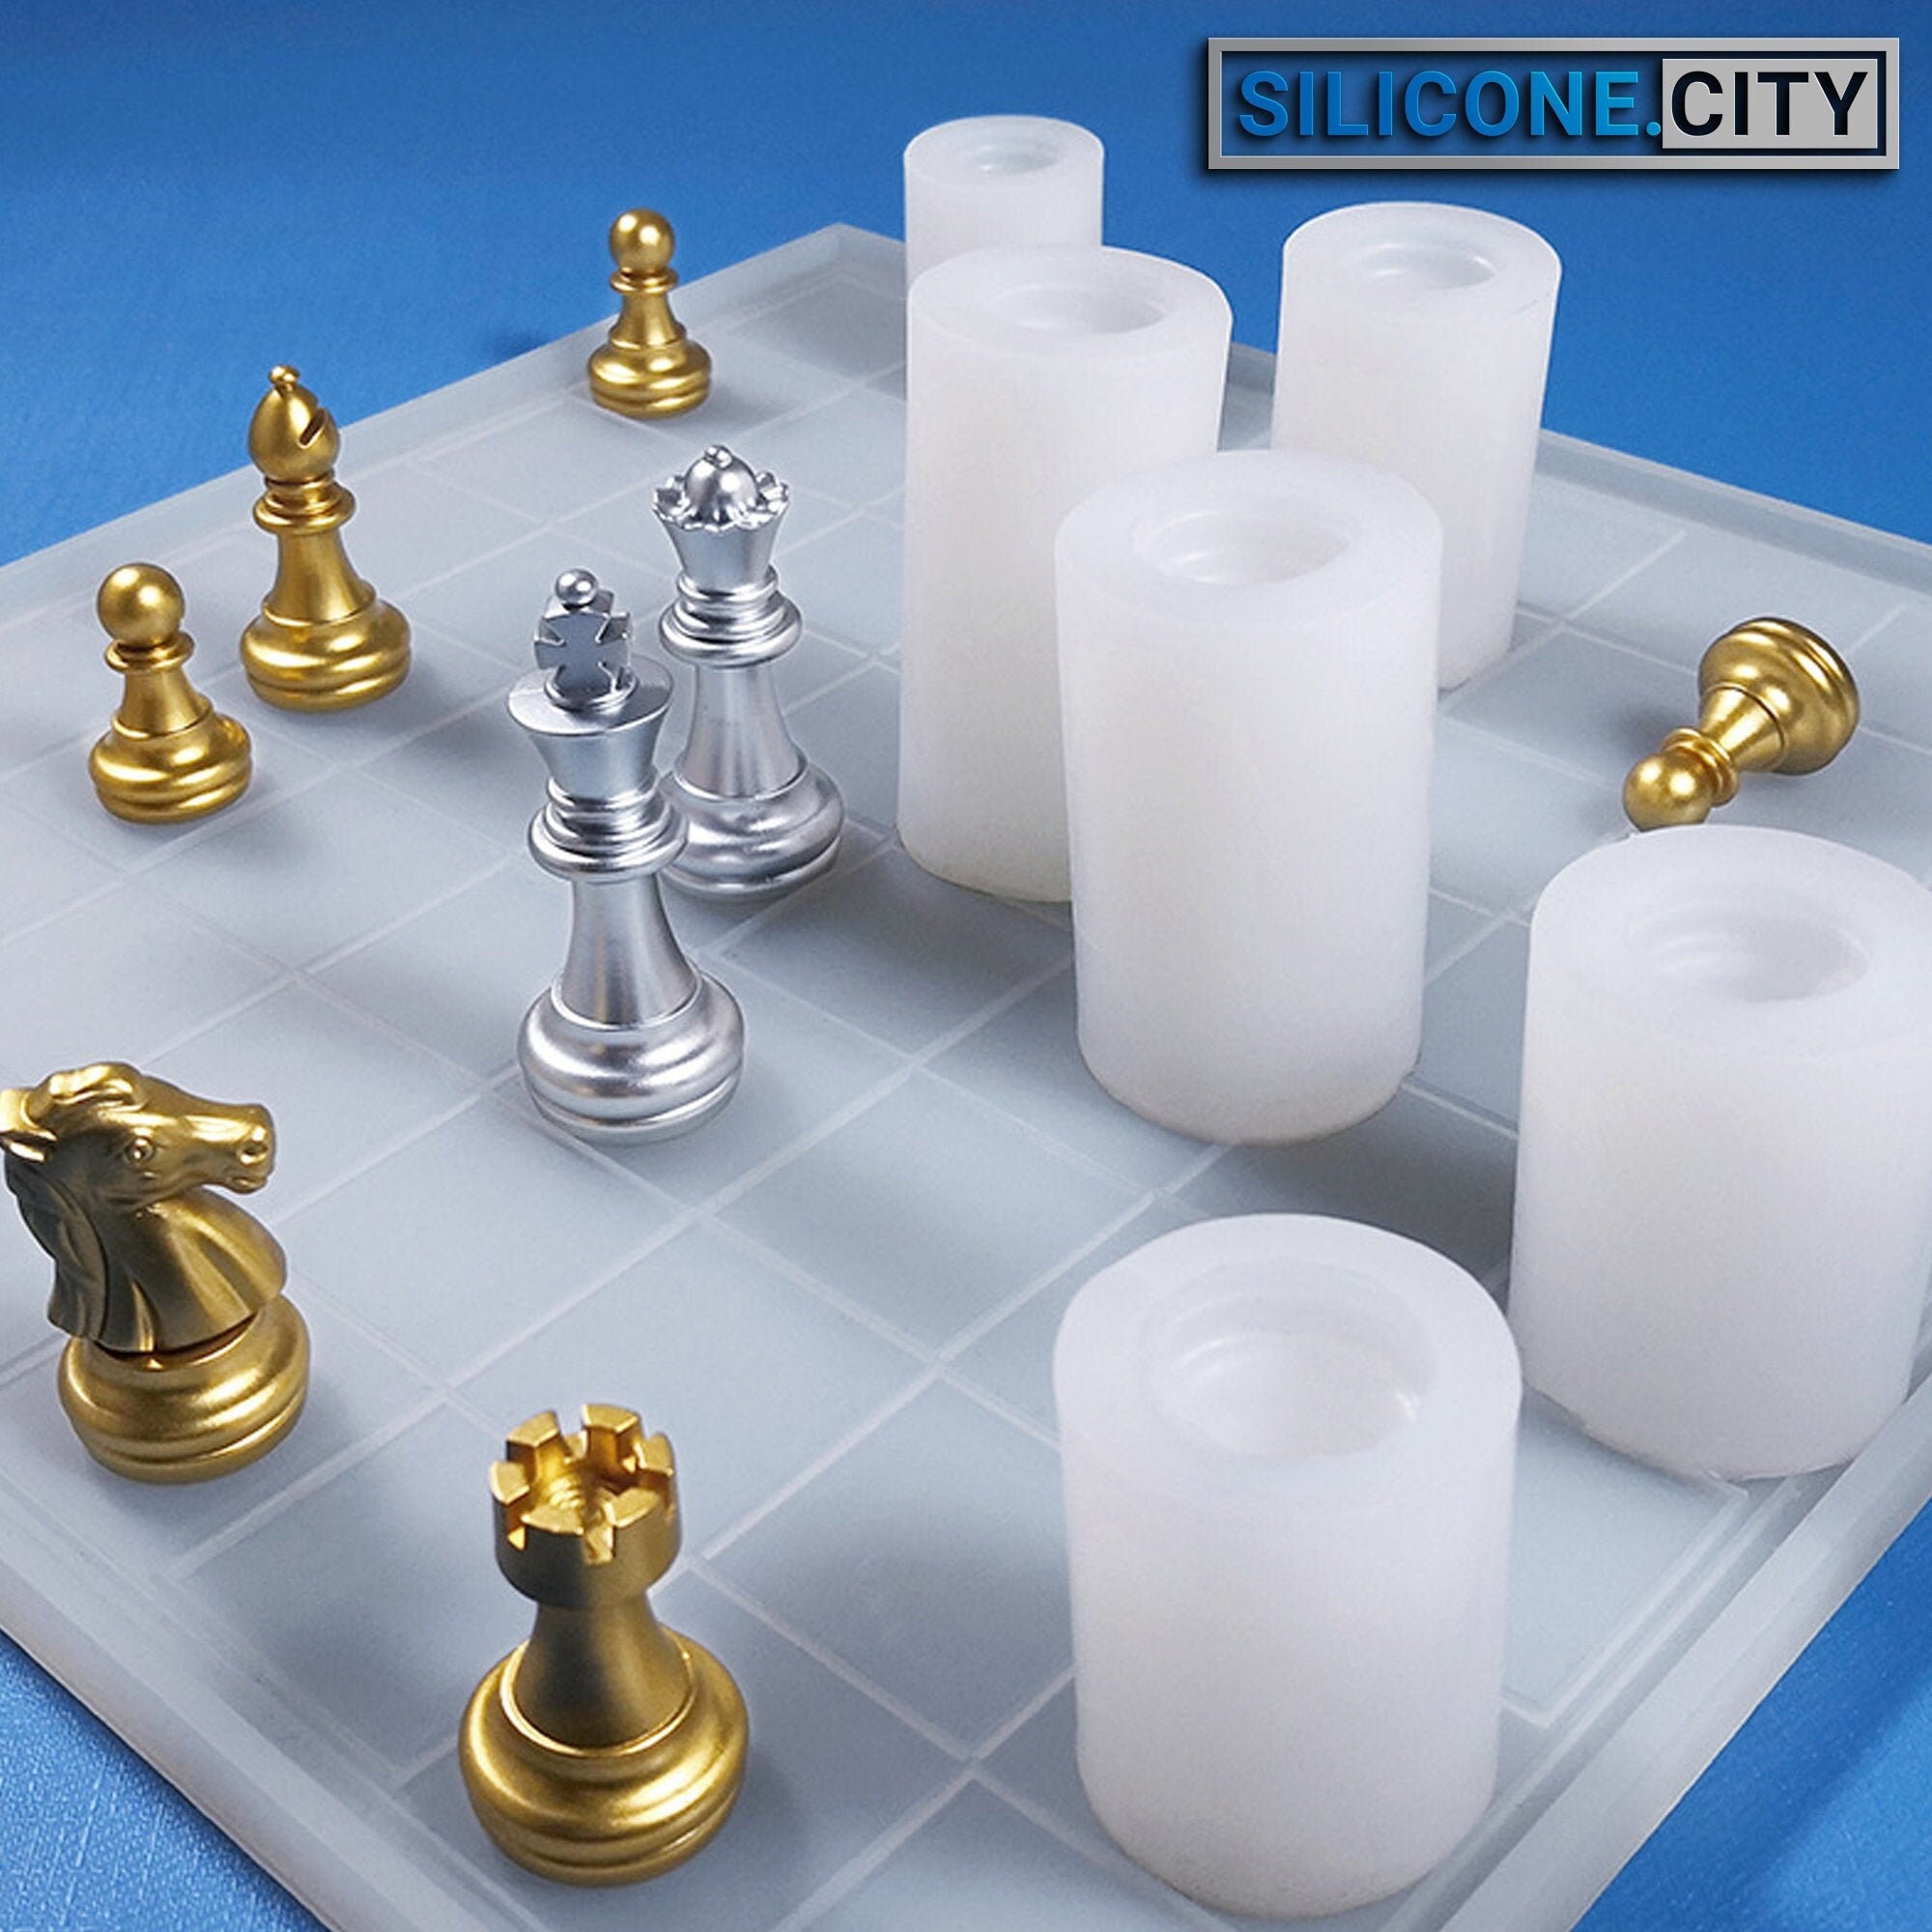 7PCS Resin Casting Resin Chess Set Mold Chess Piece Casting Mold